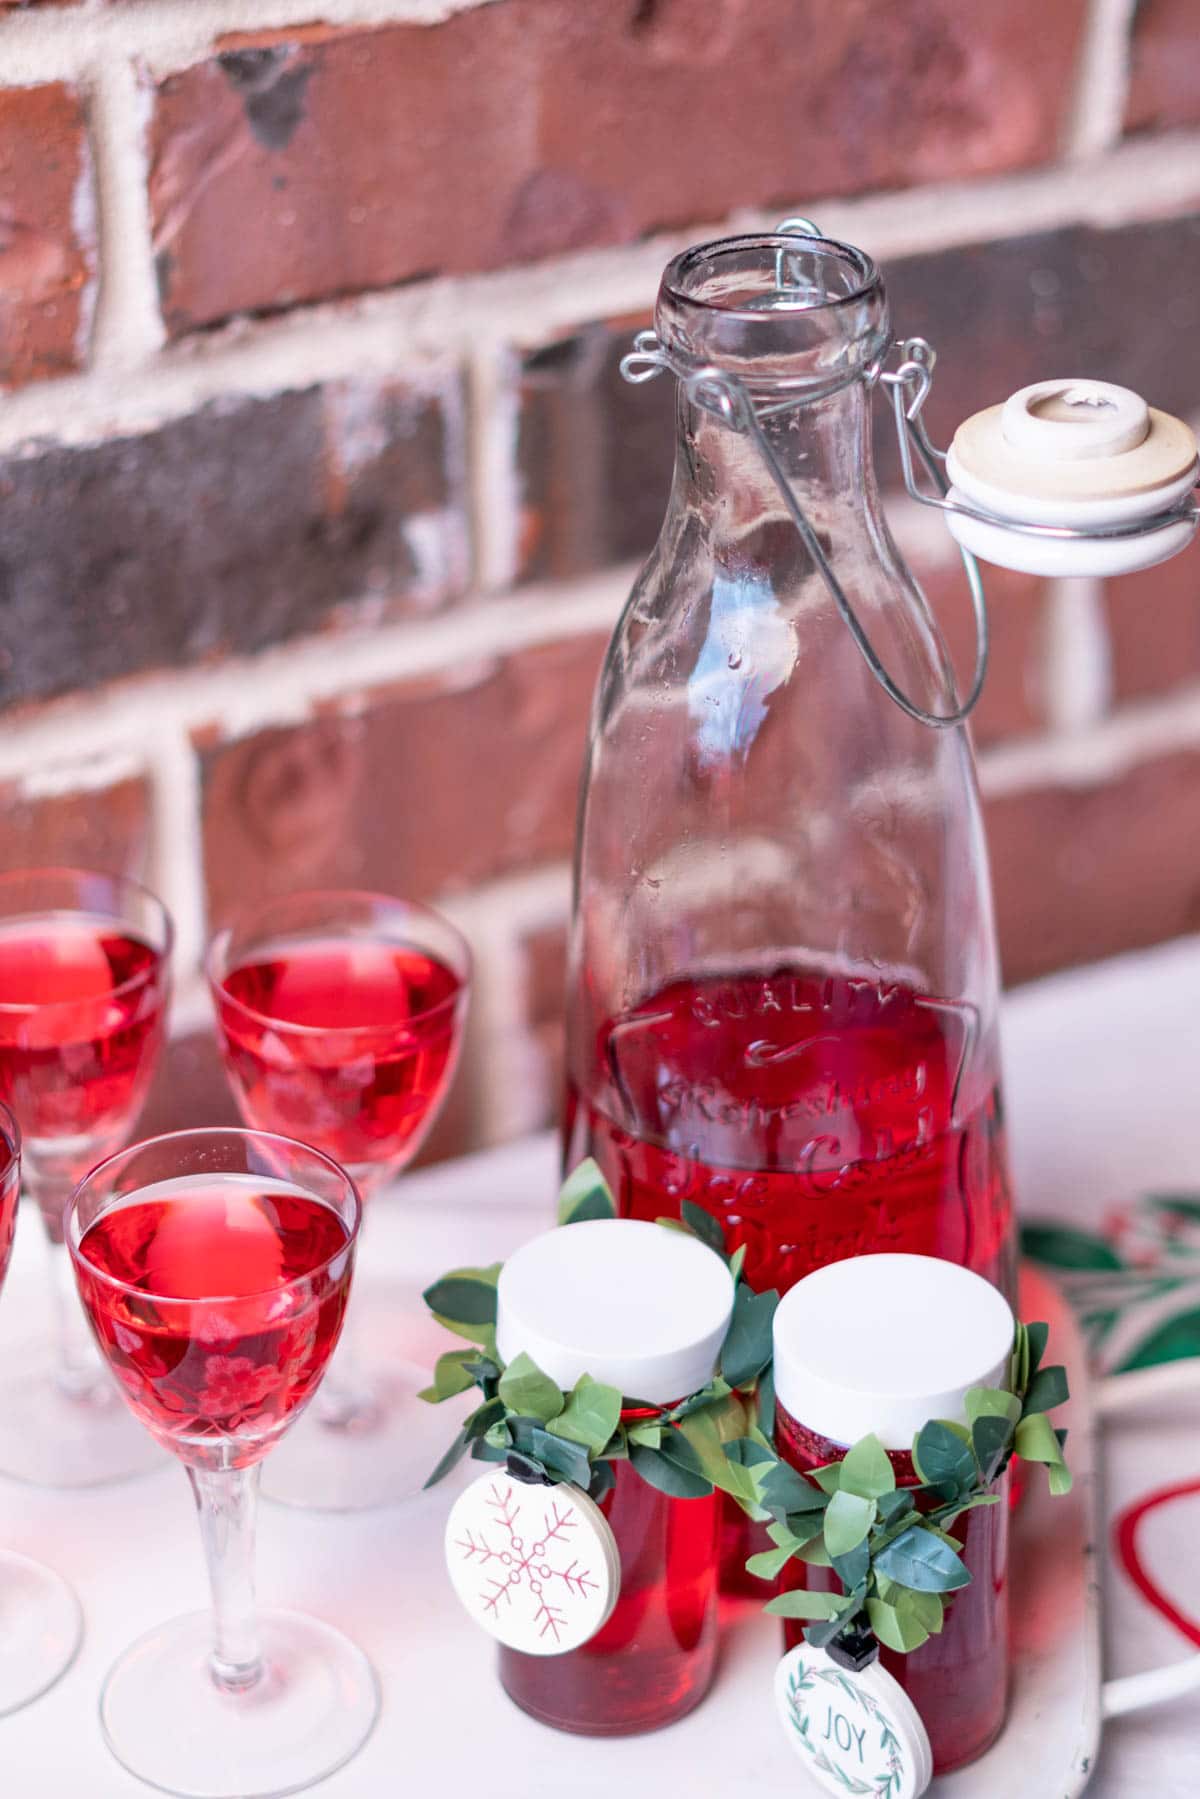 An open glass jar full of red cranberry vodka next to full vintage etched stemmed shot glasses and two smaller bottles meant for gift giving.